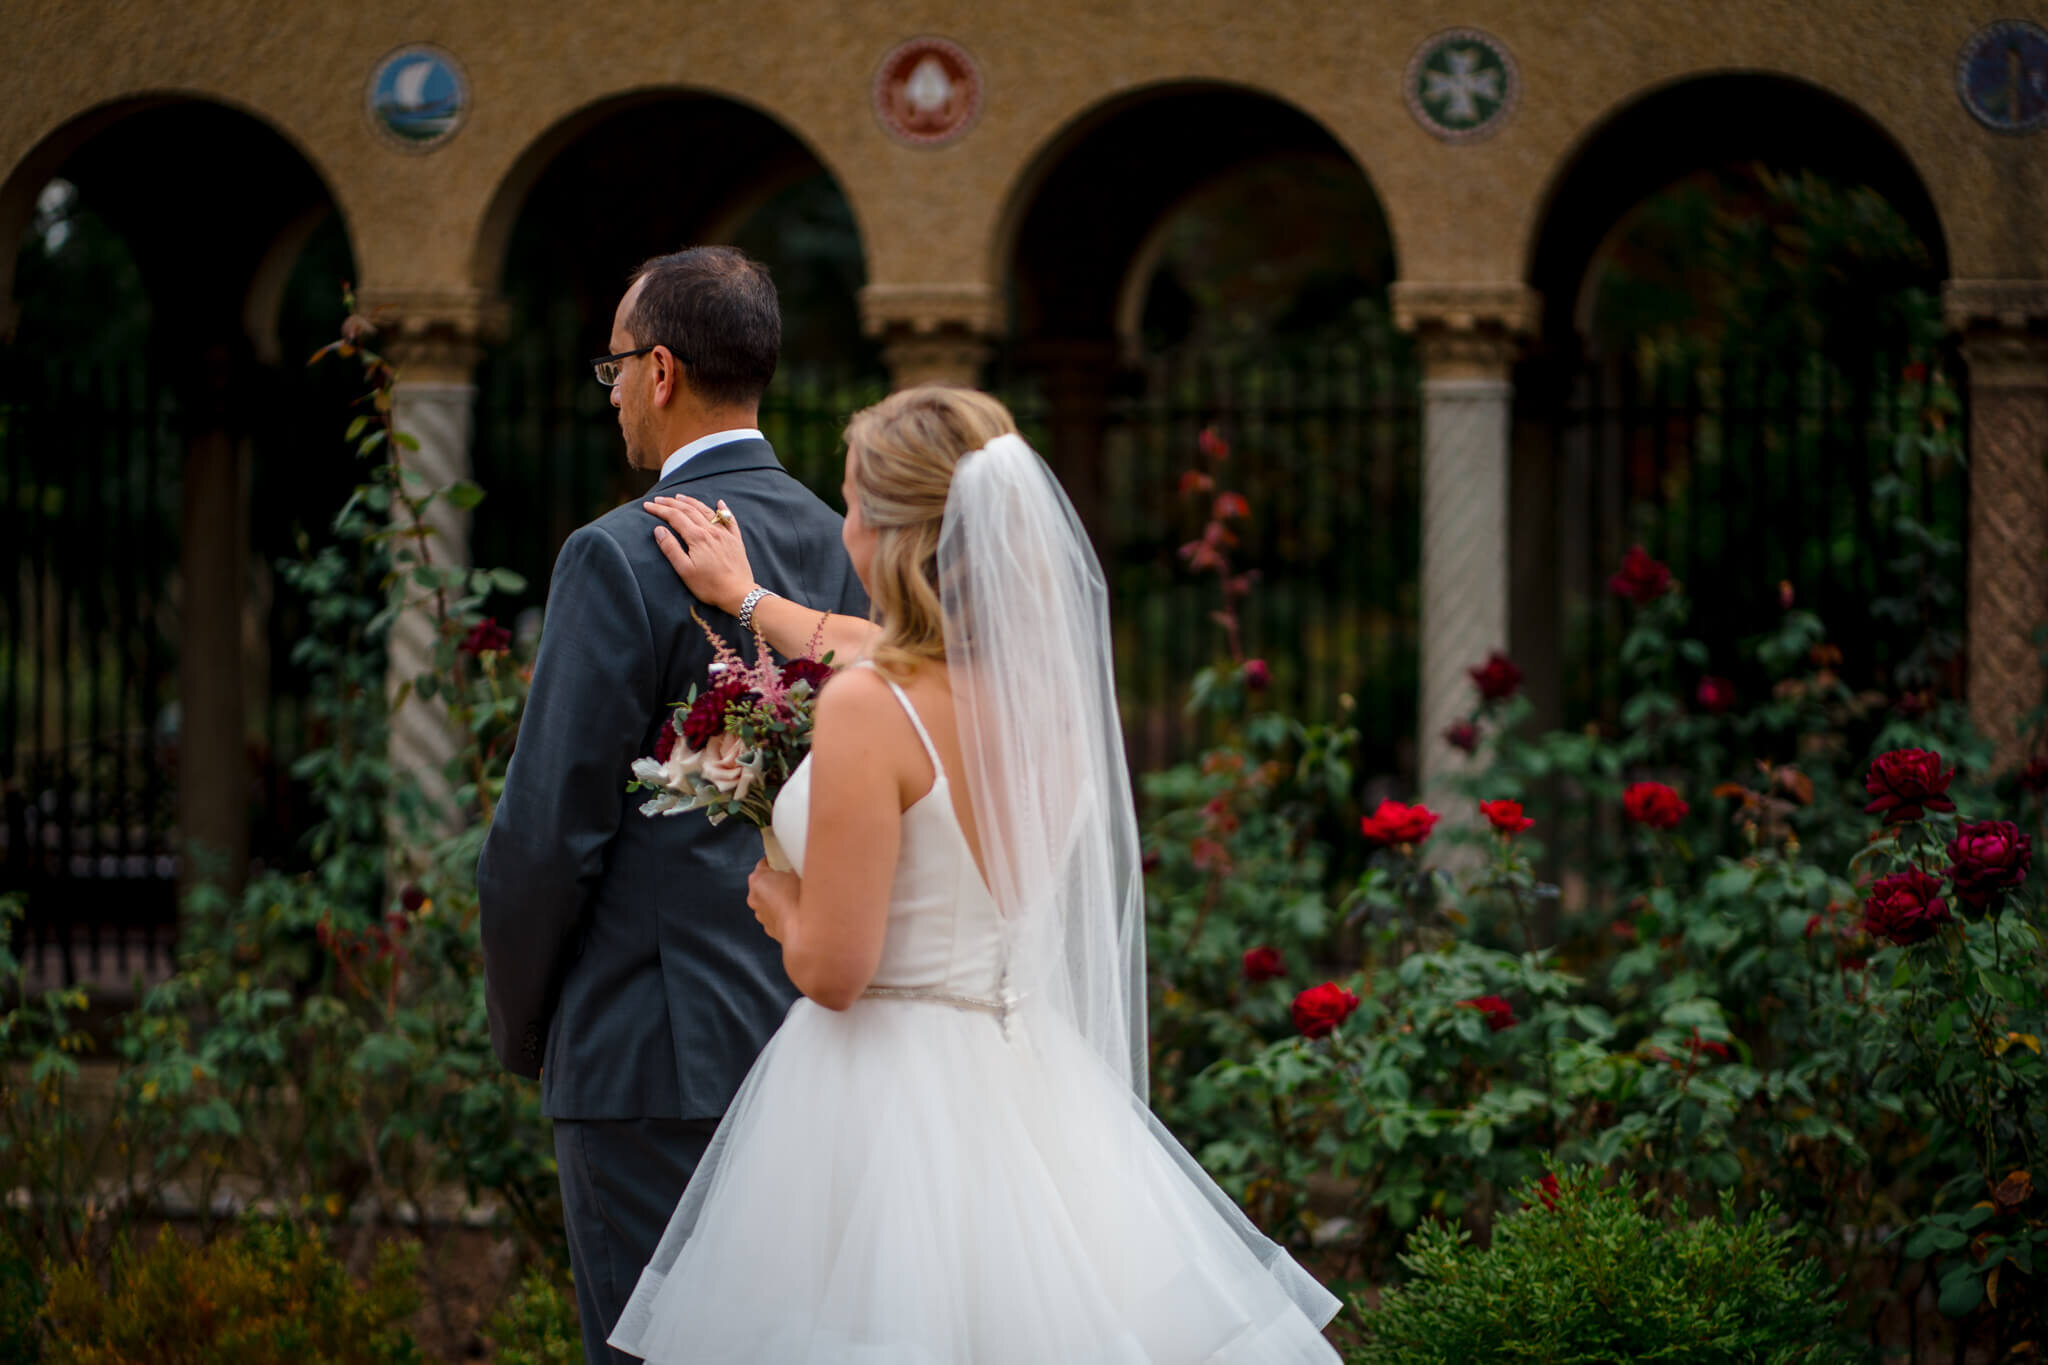 01-Washington-DC-Mini-Wedding-St-Francis-Hall-Franciscan-Monastery-First-Look-Photography-by-Bee-Two-Sweet-18.jpg